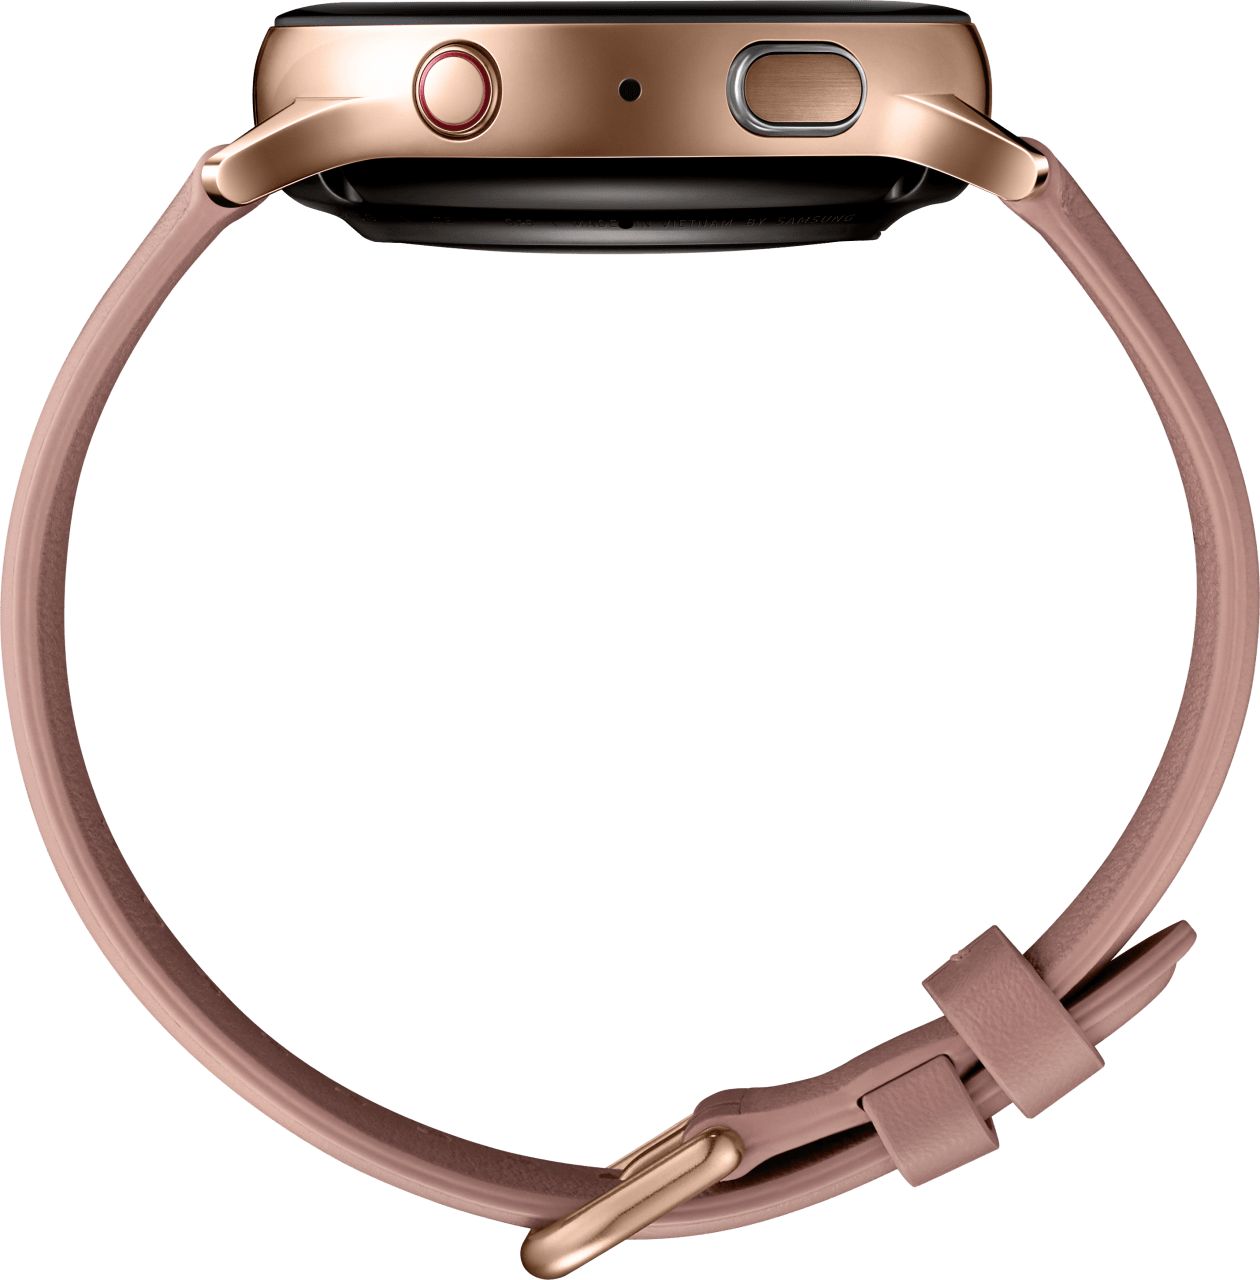 Oro Samsung Galaxy Watch Active2 (LTE), 40mm Stainless steel case, Leather band.4